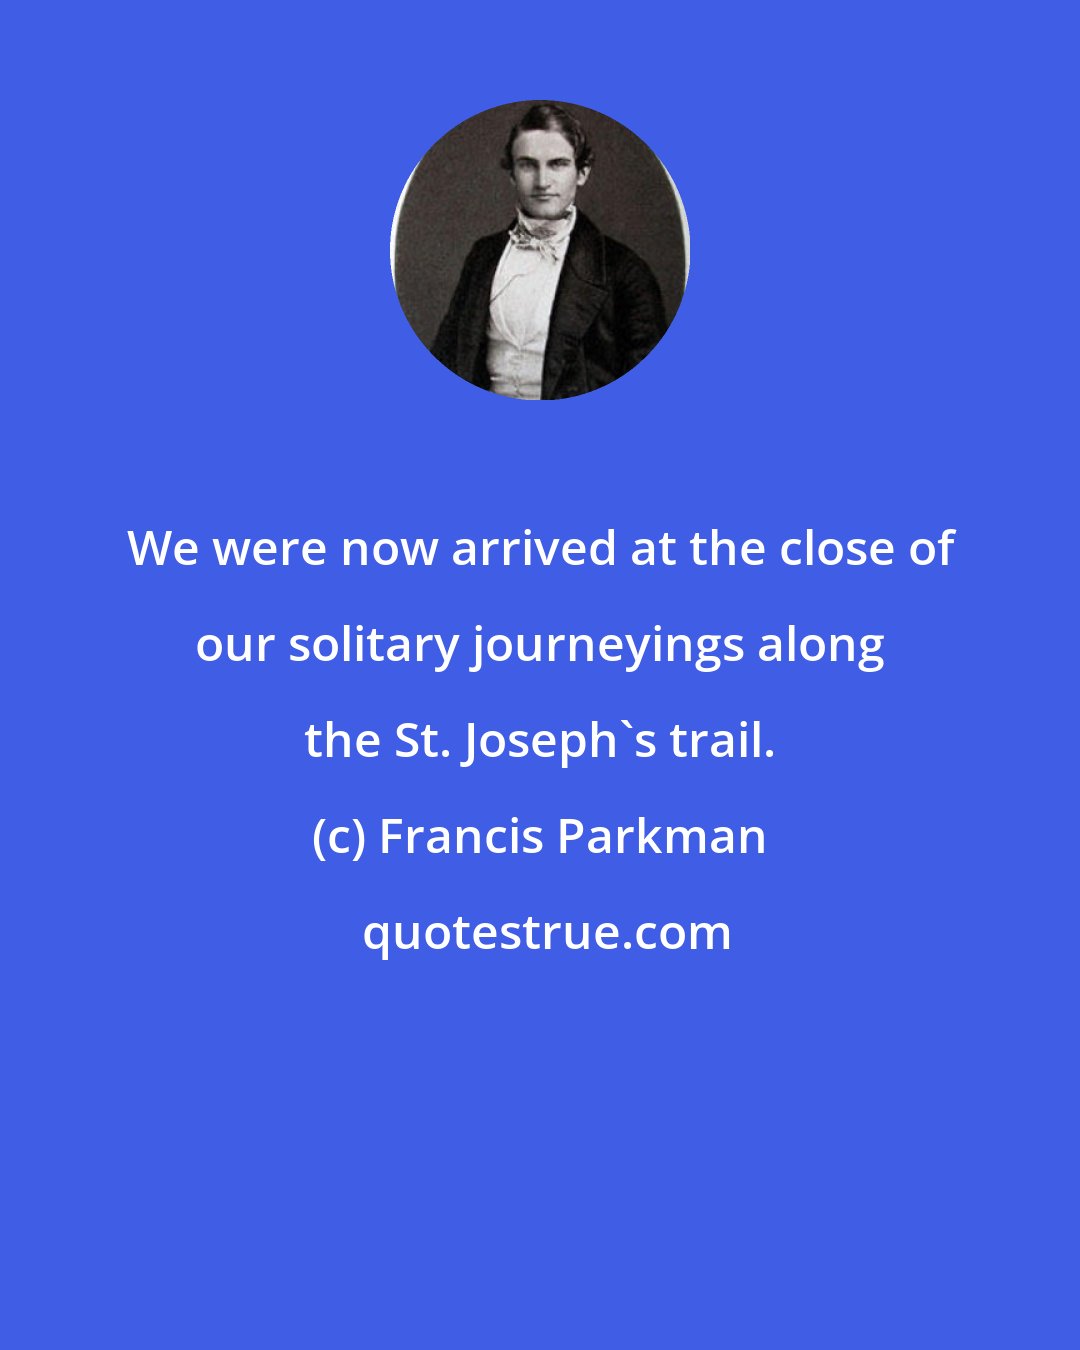 Francis Parkman: We were now arrived at the close of our solitary journeyings along the St. Joseph's trail.